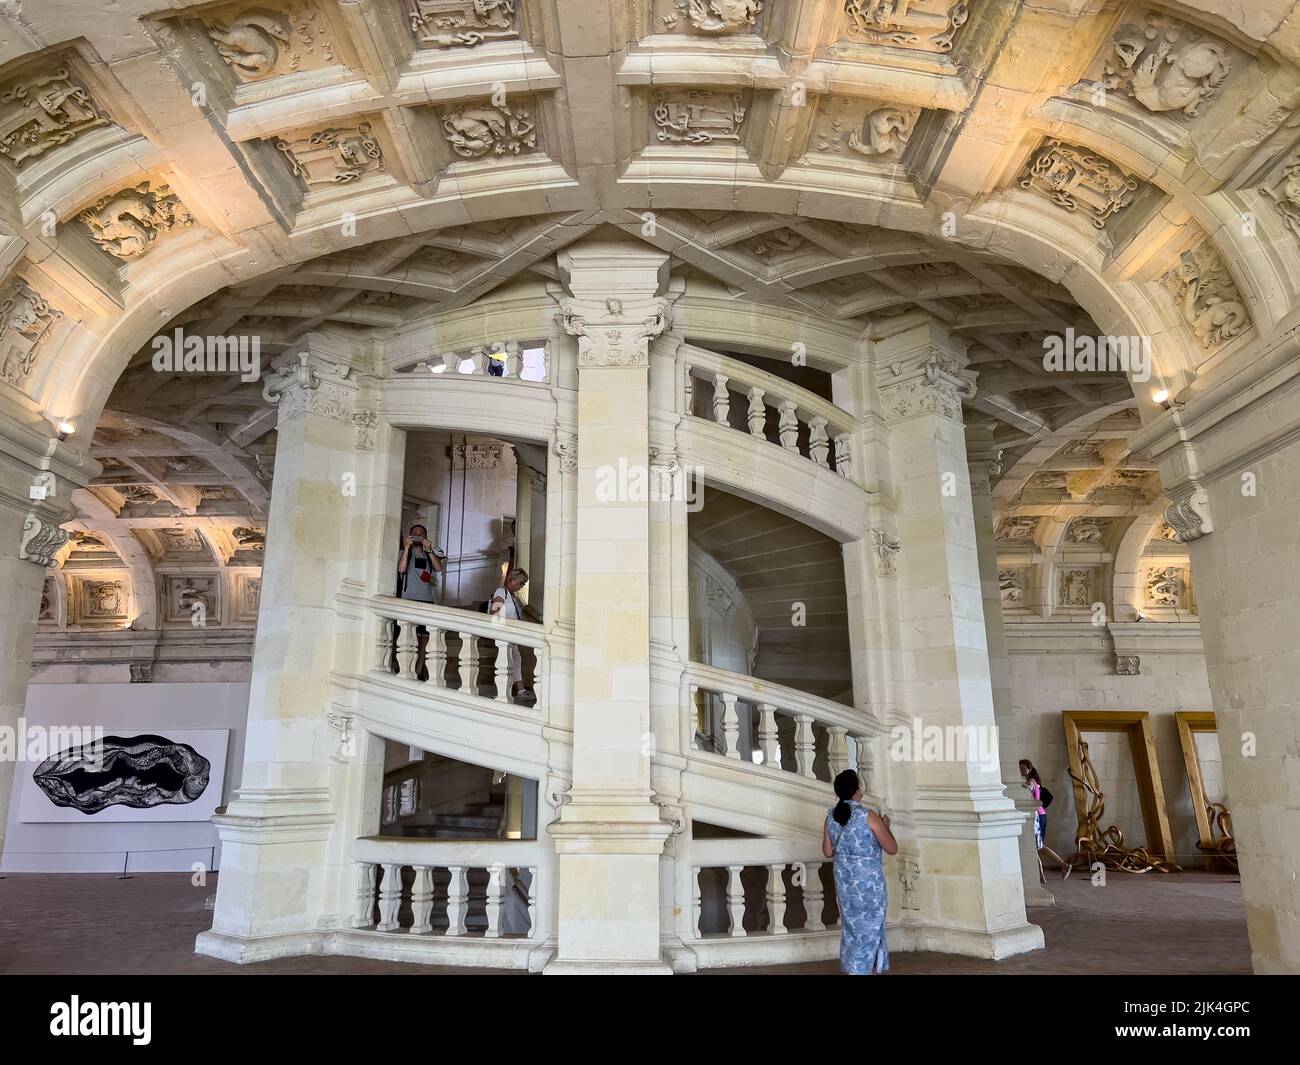 double helix staircase of the Chateau de Chambord in the Loire Valley Stock Photo